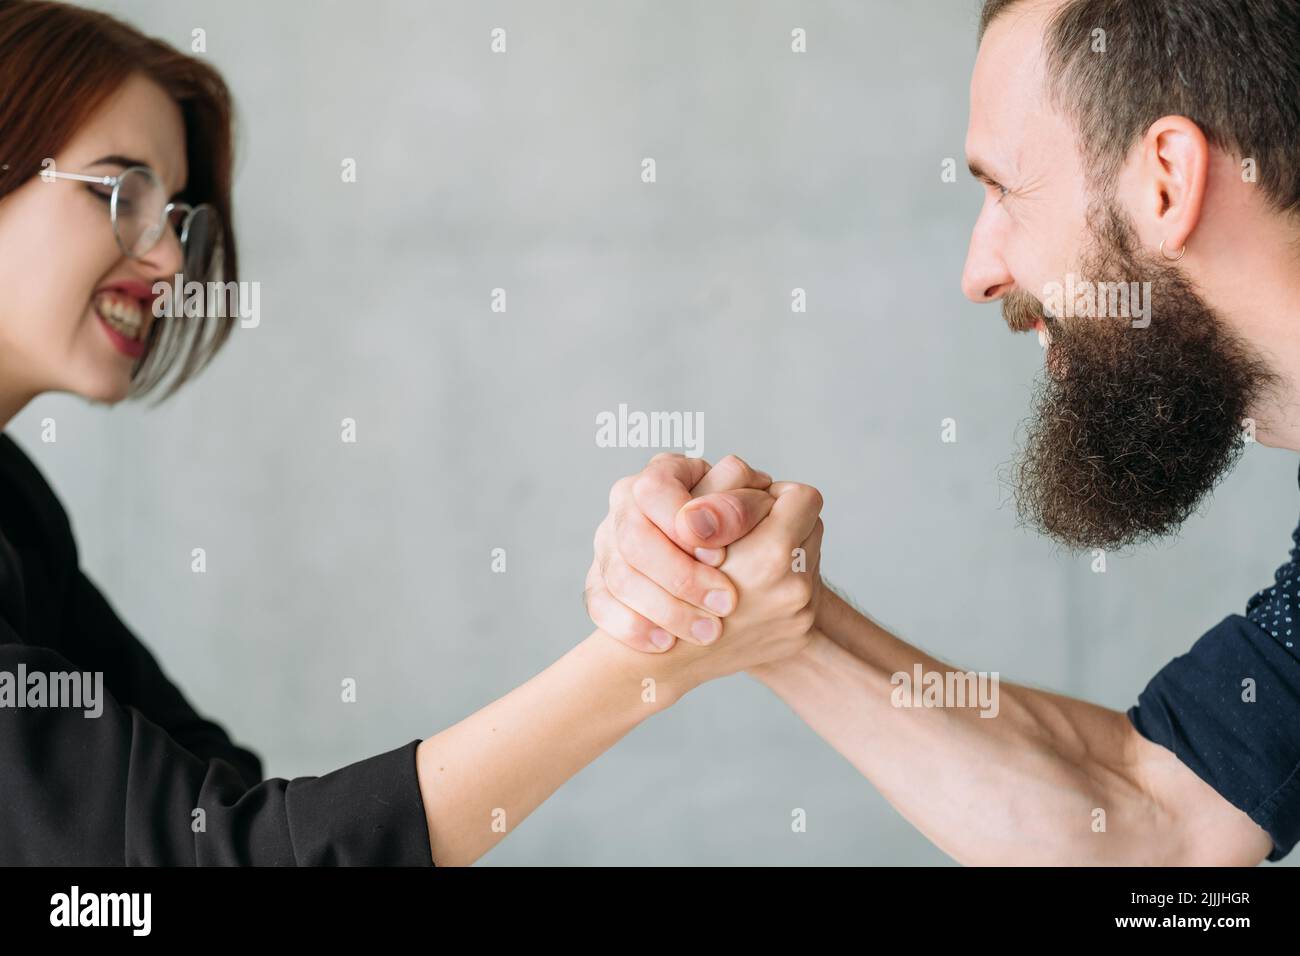 business competition gender fight opponents Stock Photo